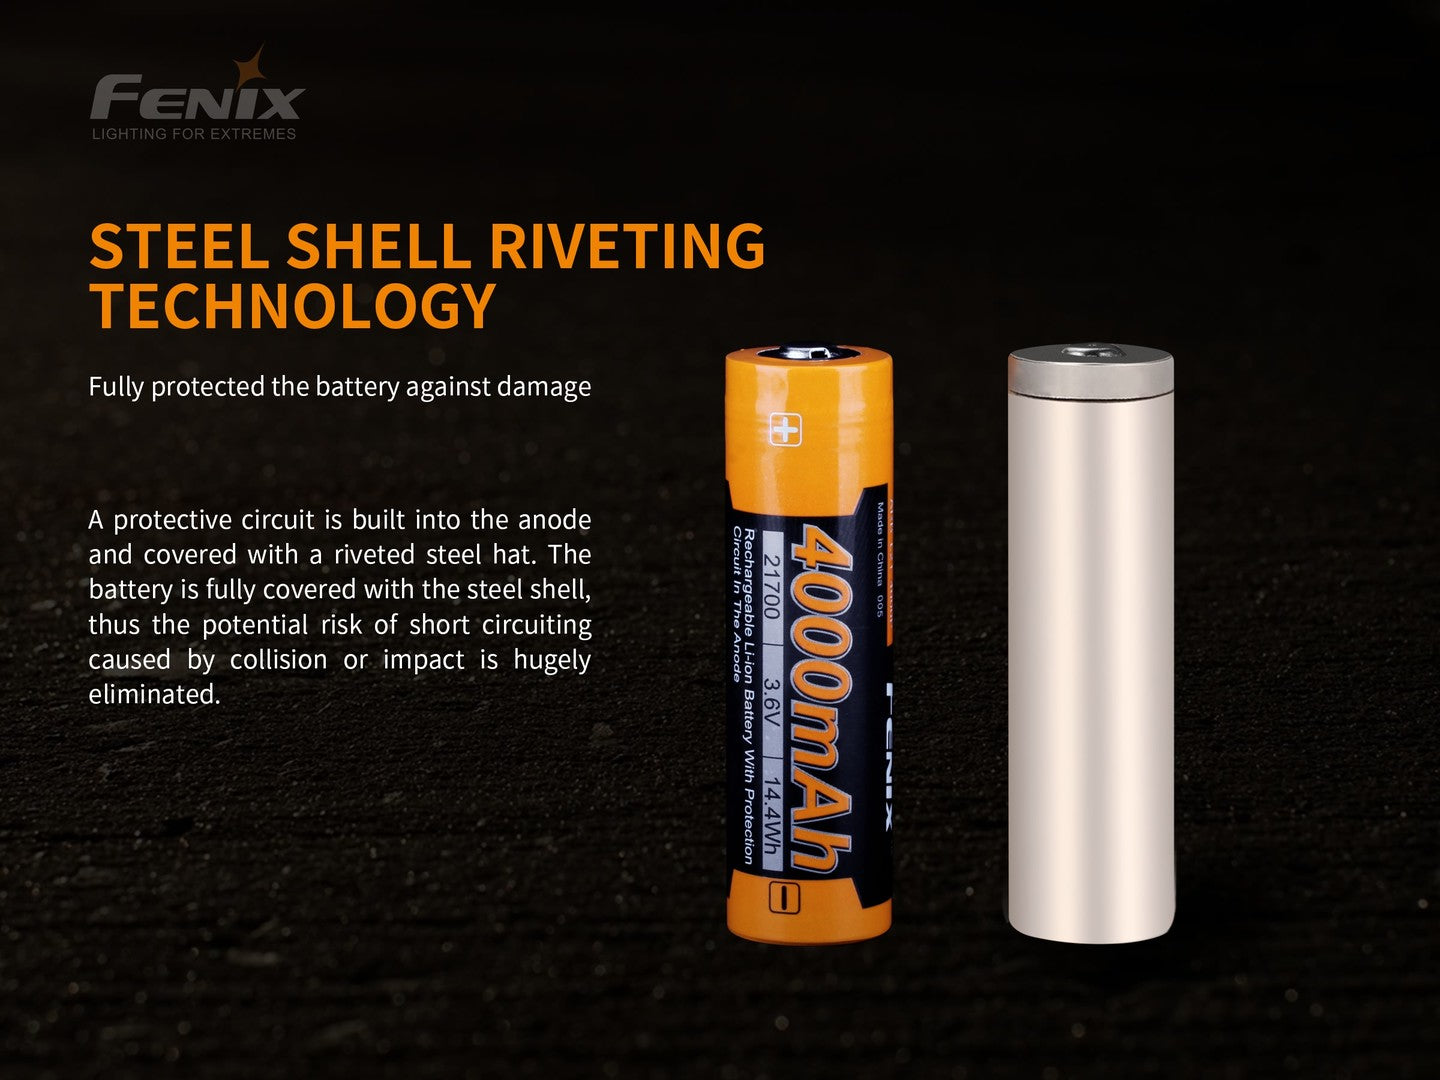 Fenix ARB-L21-4000P 21700 Rechargeable Battery - Protected High-Drain Li-ion Button Top Battery